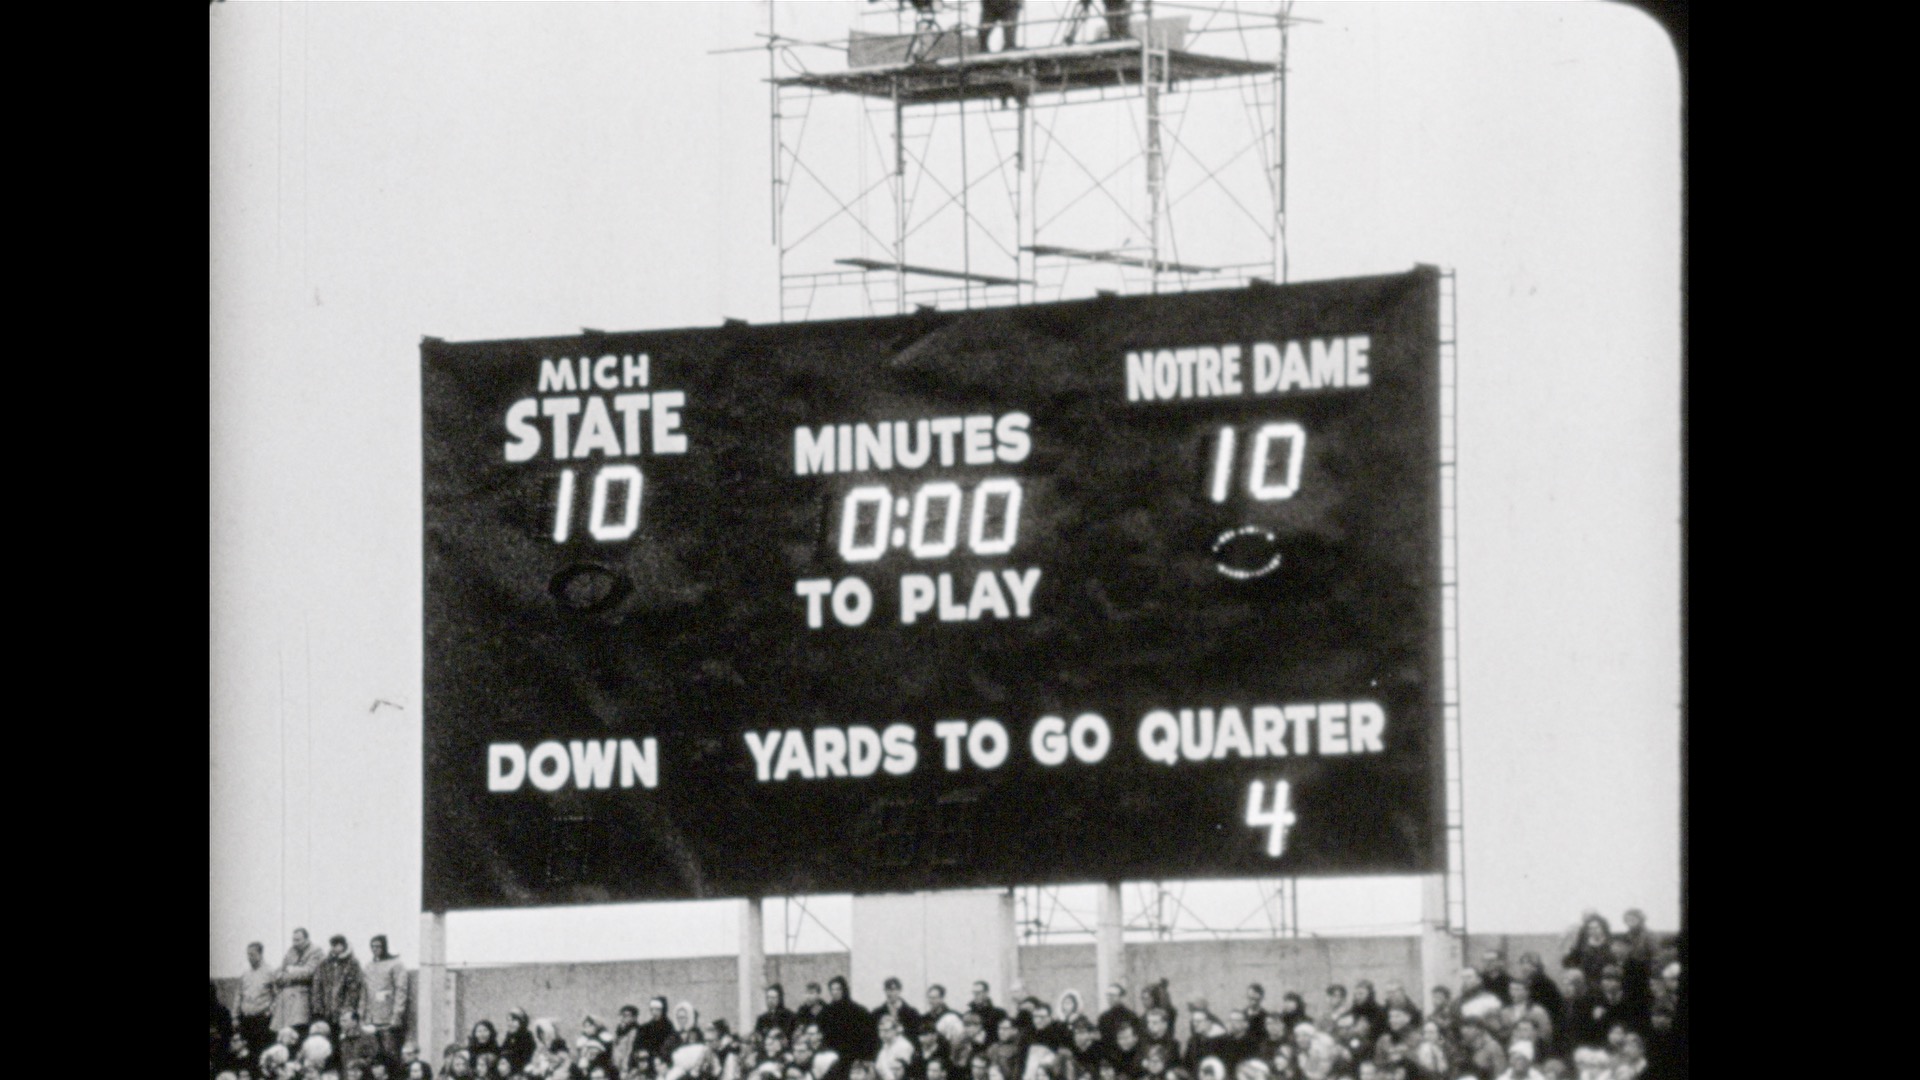 MSU Football vs. Notre Dame "Game of the Century", 1966 (b&w)